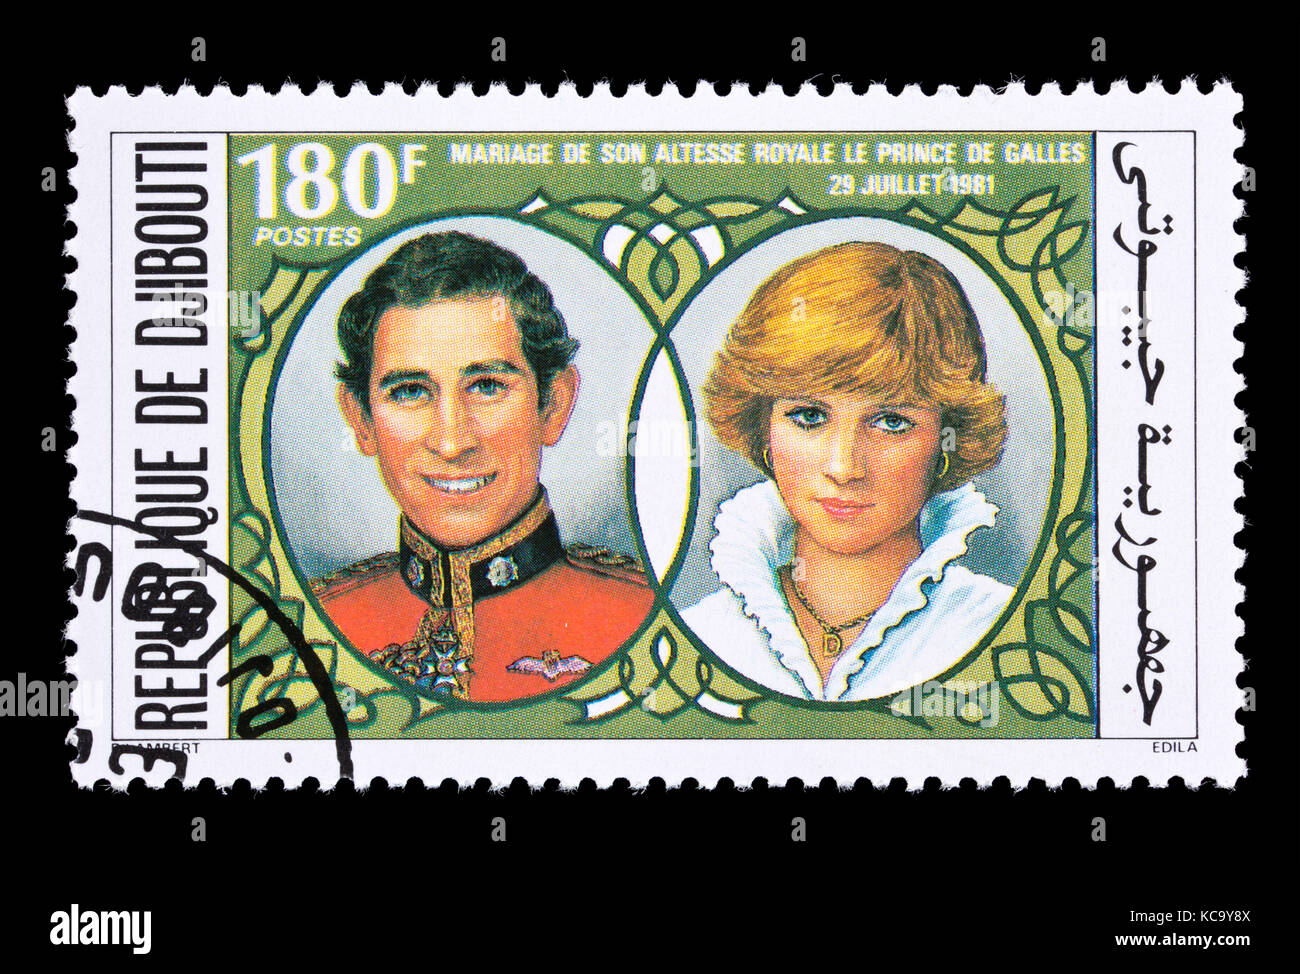 Postage stamp fro Djibouti depicting Prince Charles and Lady Diana, issued for their royal wedding in 1981. Stock Photo